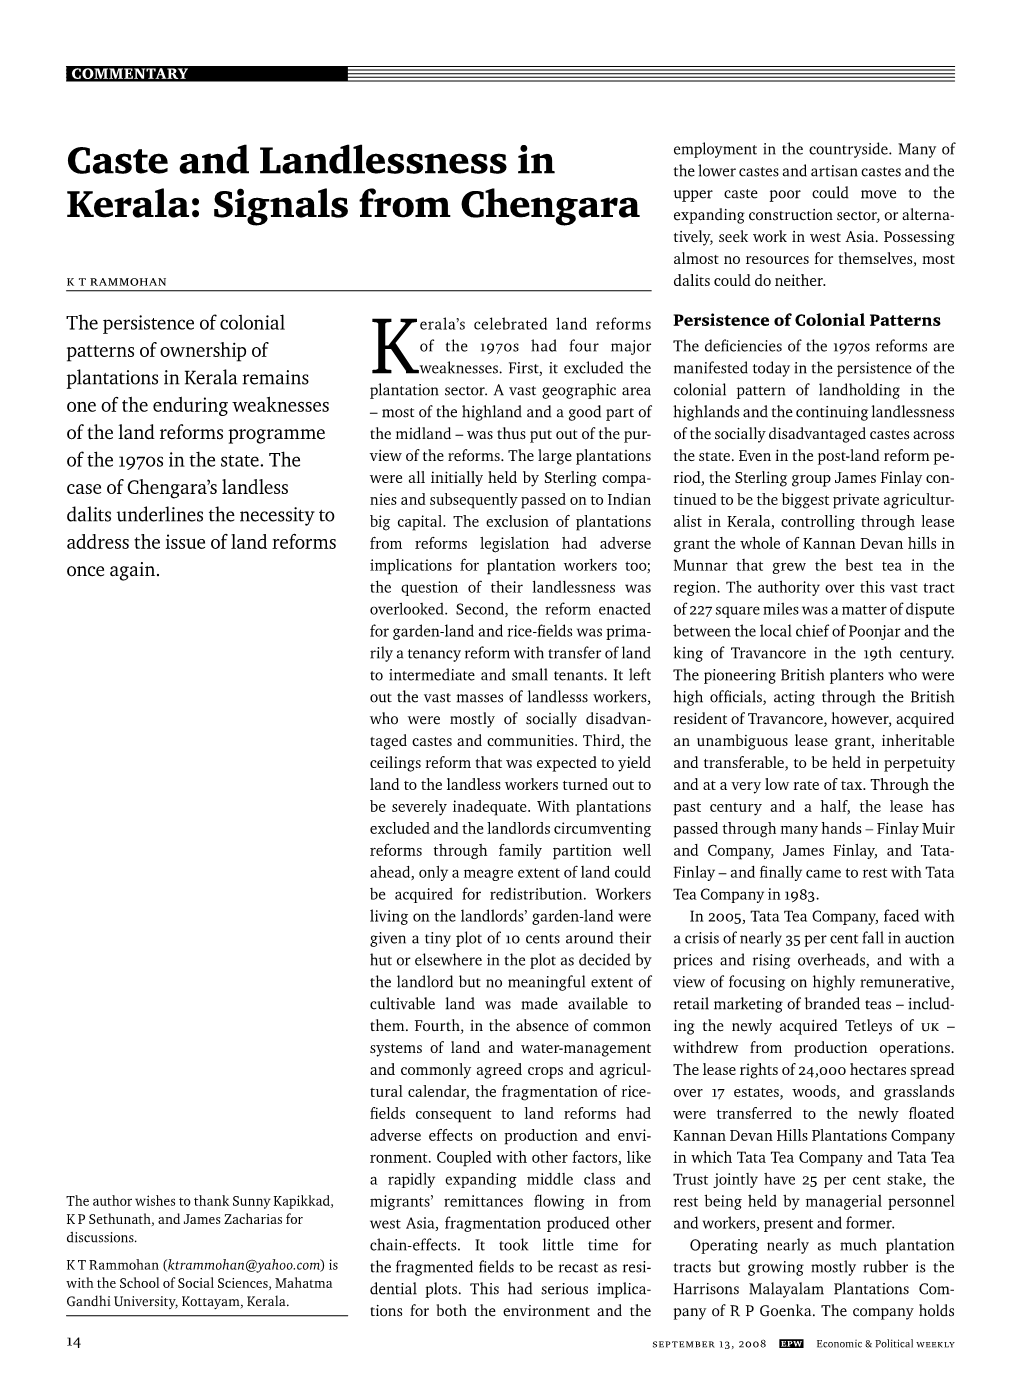 Caste and Landlessness in Kerala: Signals from Chengara